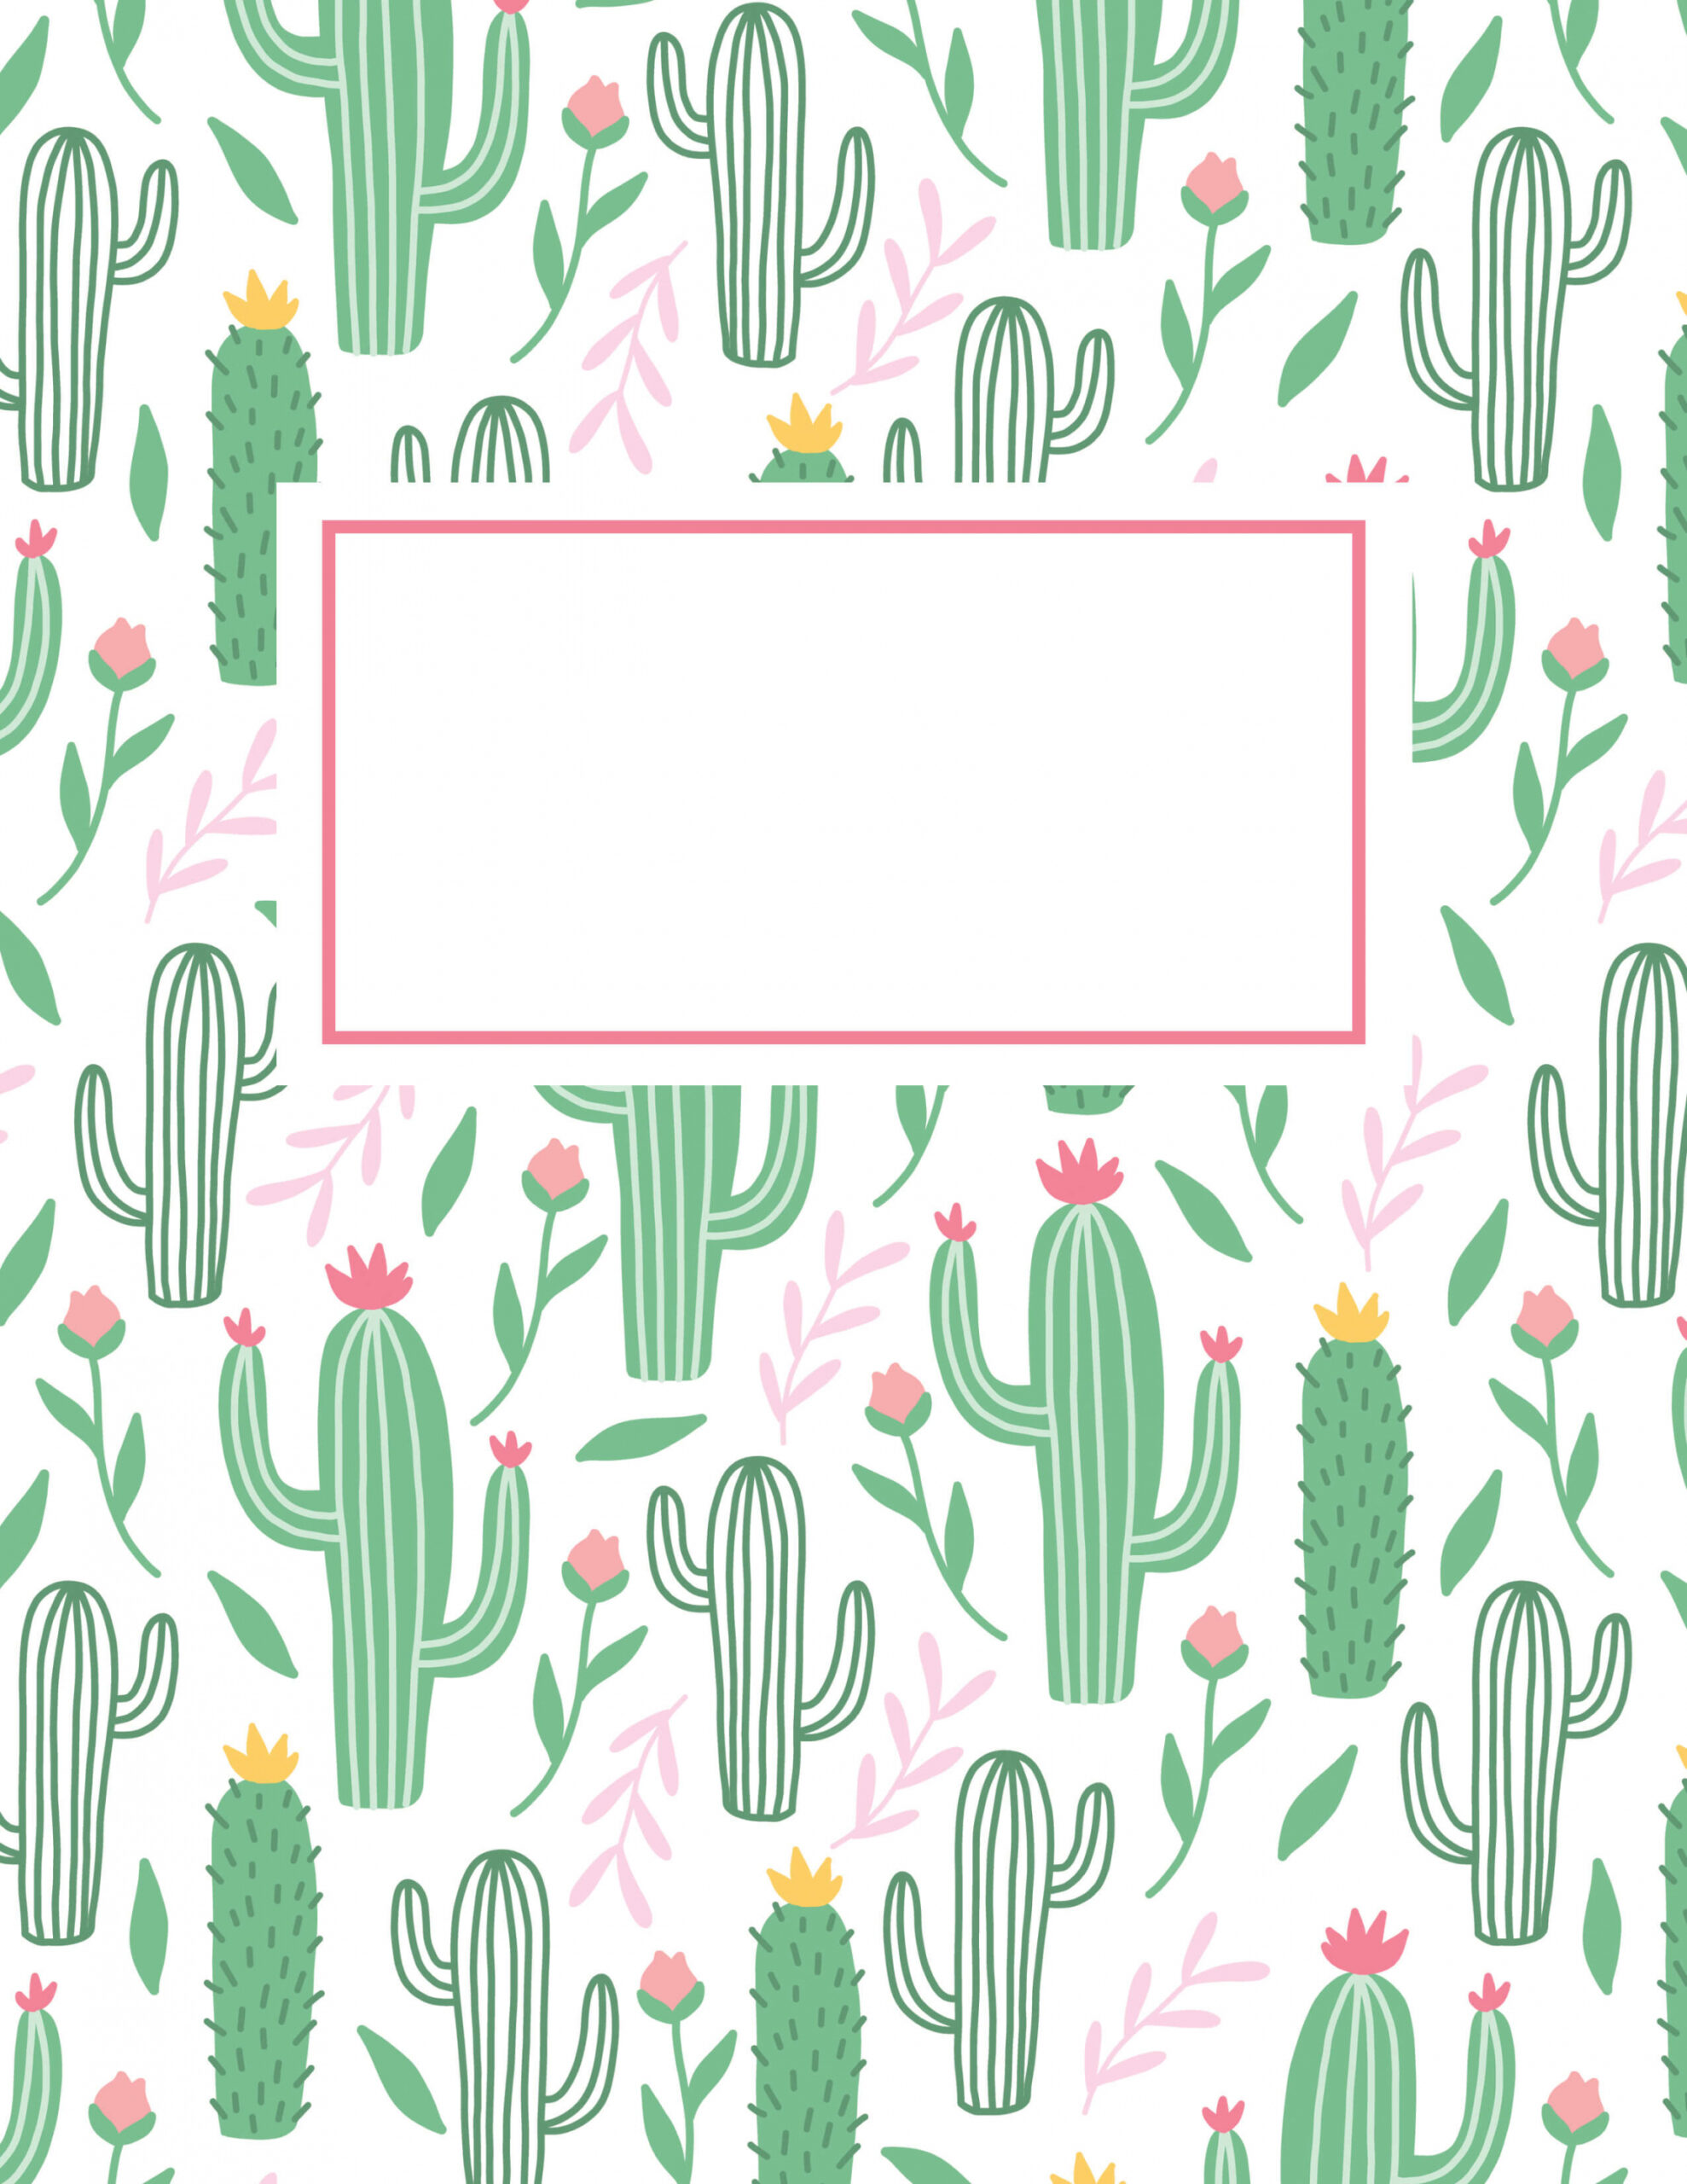 Cactus Printable Binder Cover - Chicfetti - FREE Printables - Free Printable Binder Cover